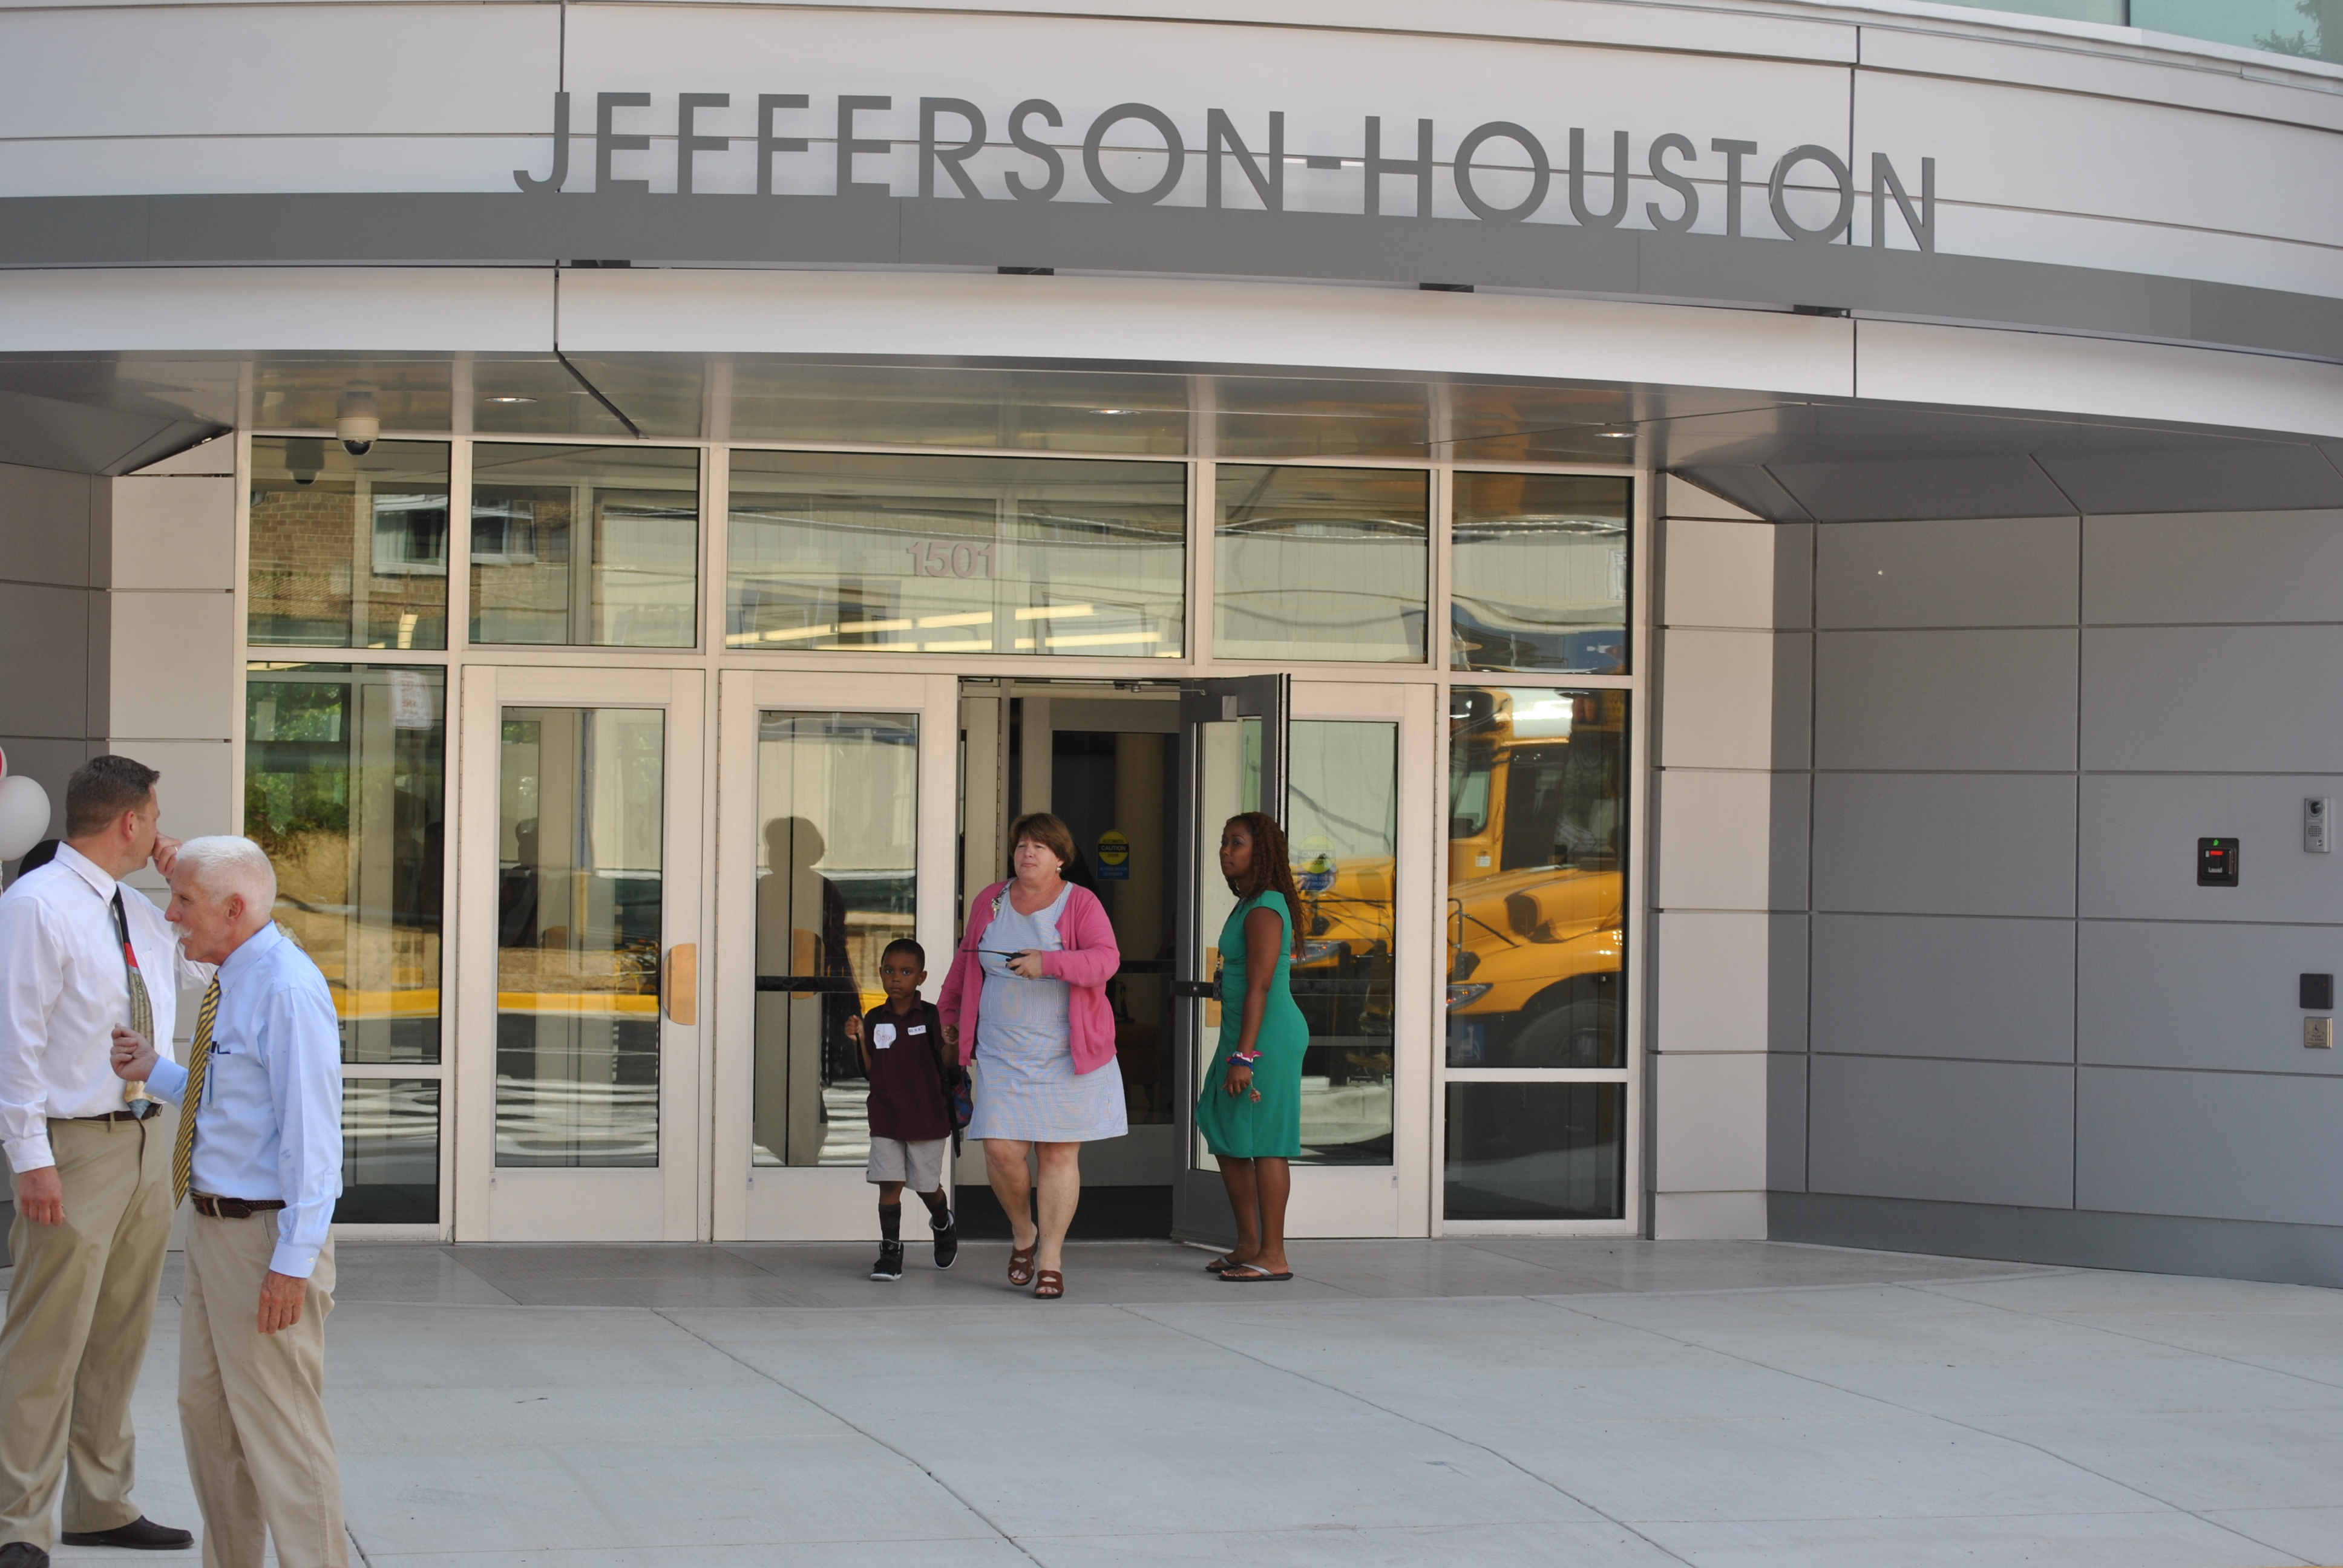 Your View: Redistricting failed to reduce strain on Jefferson-Houston